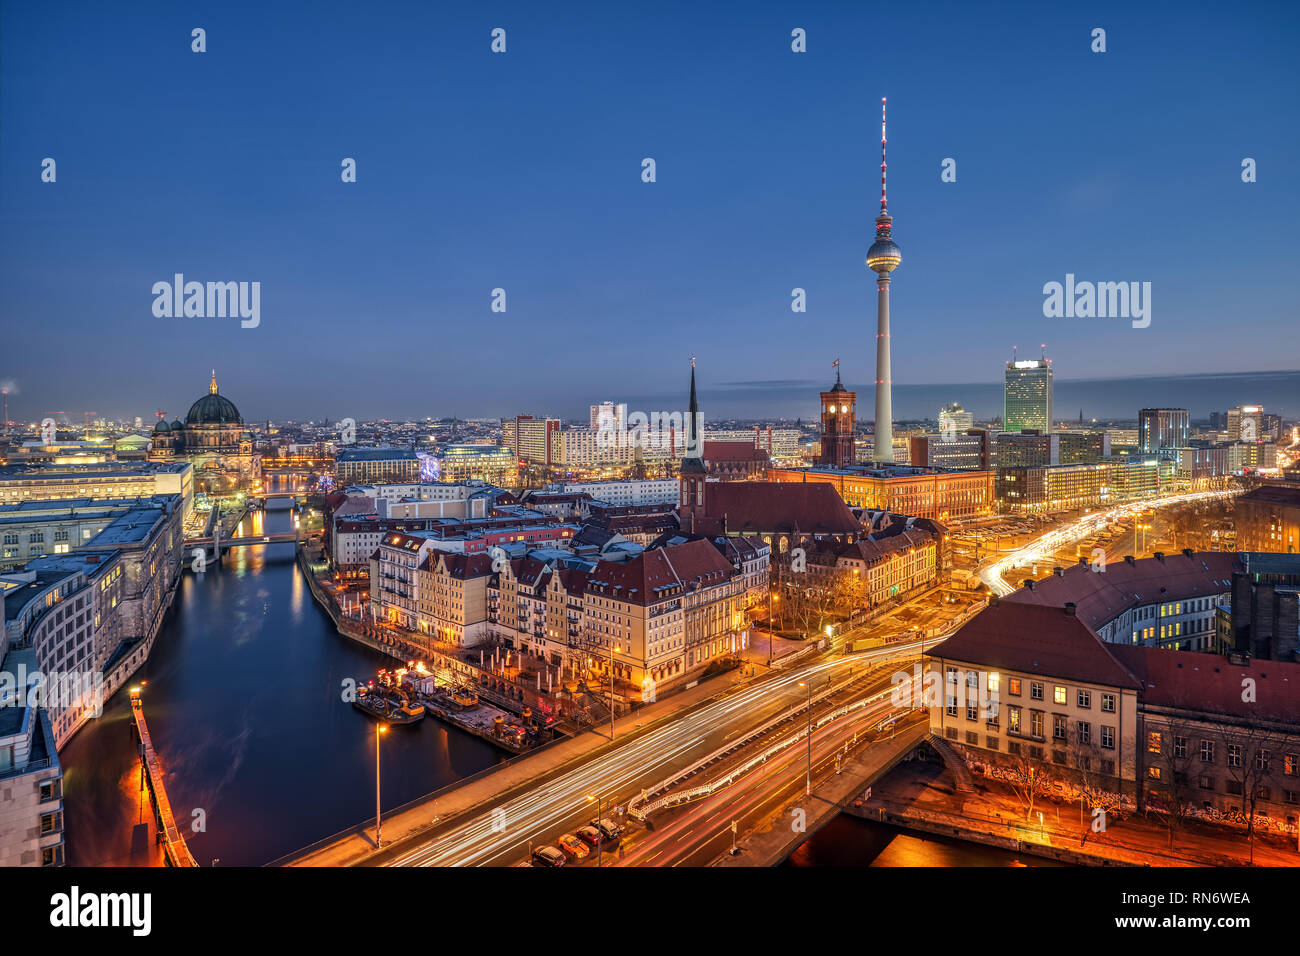 Berlin Mitte with the famous Television Tower at night Stock Photo